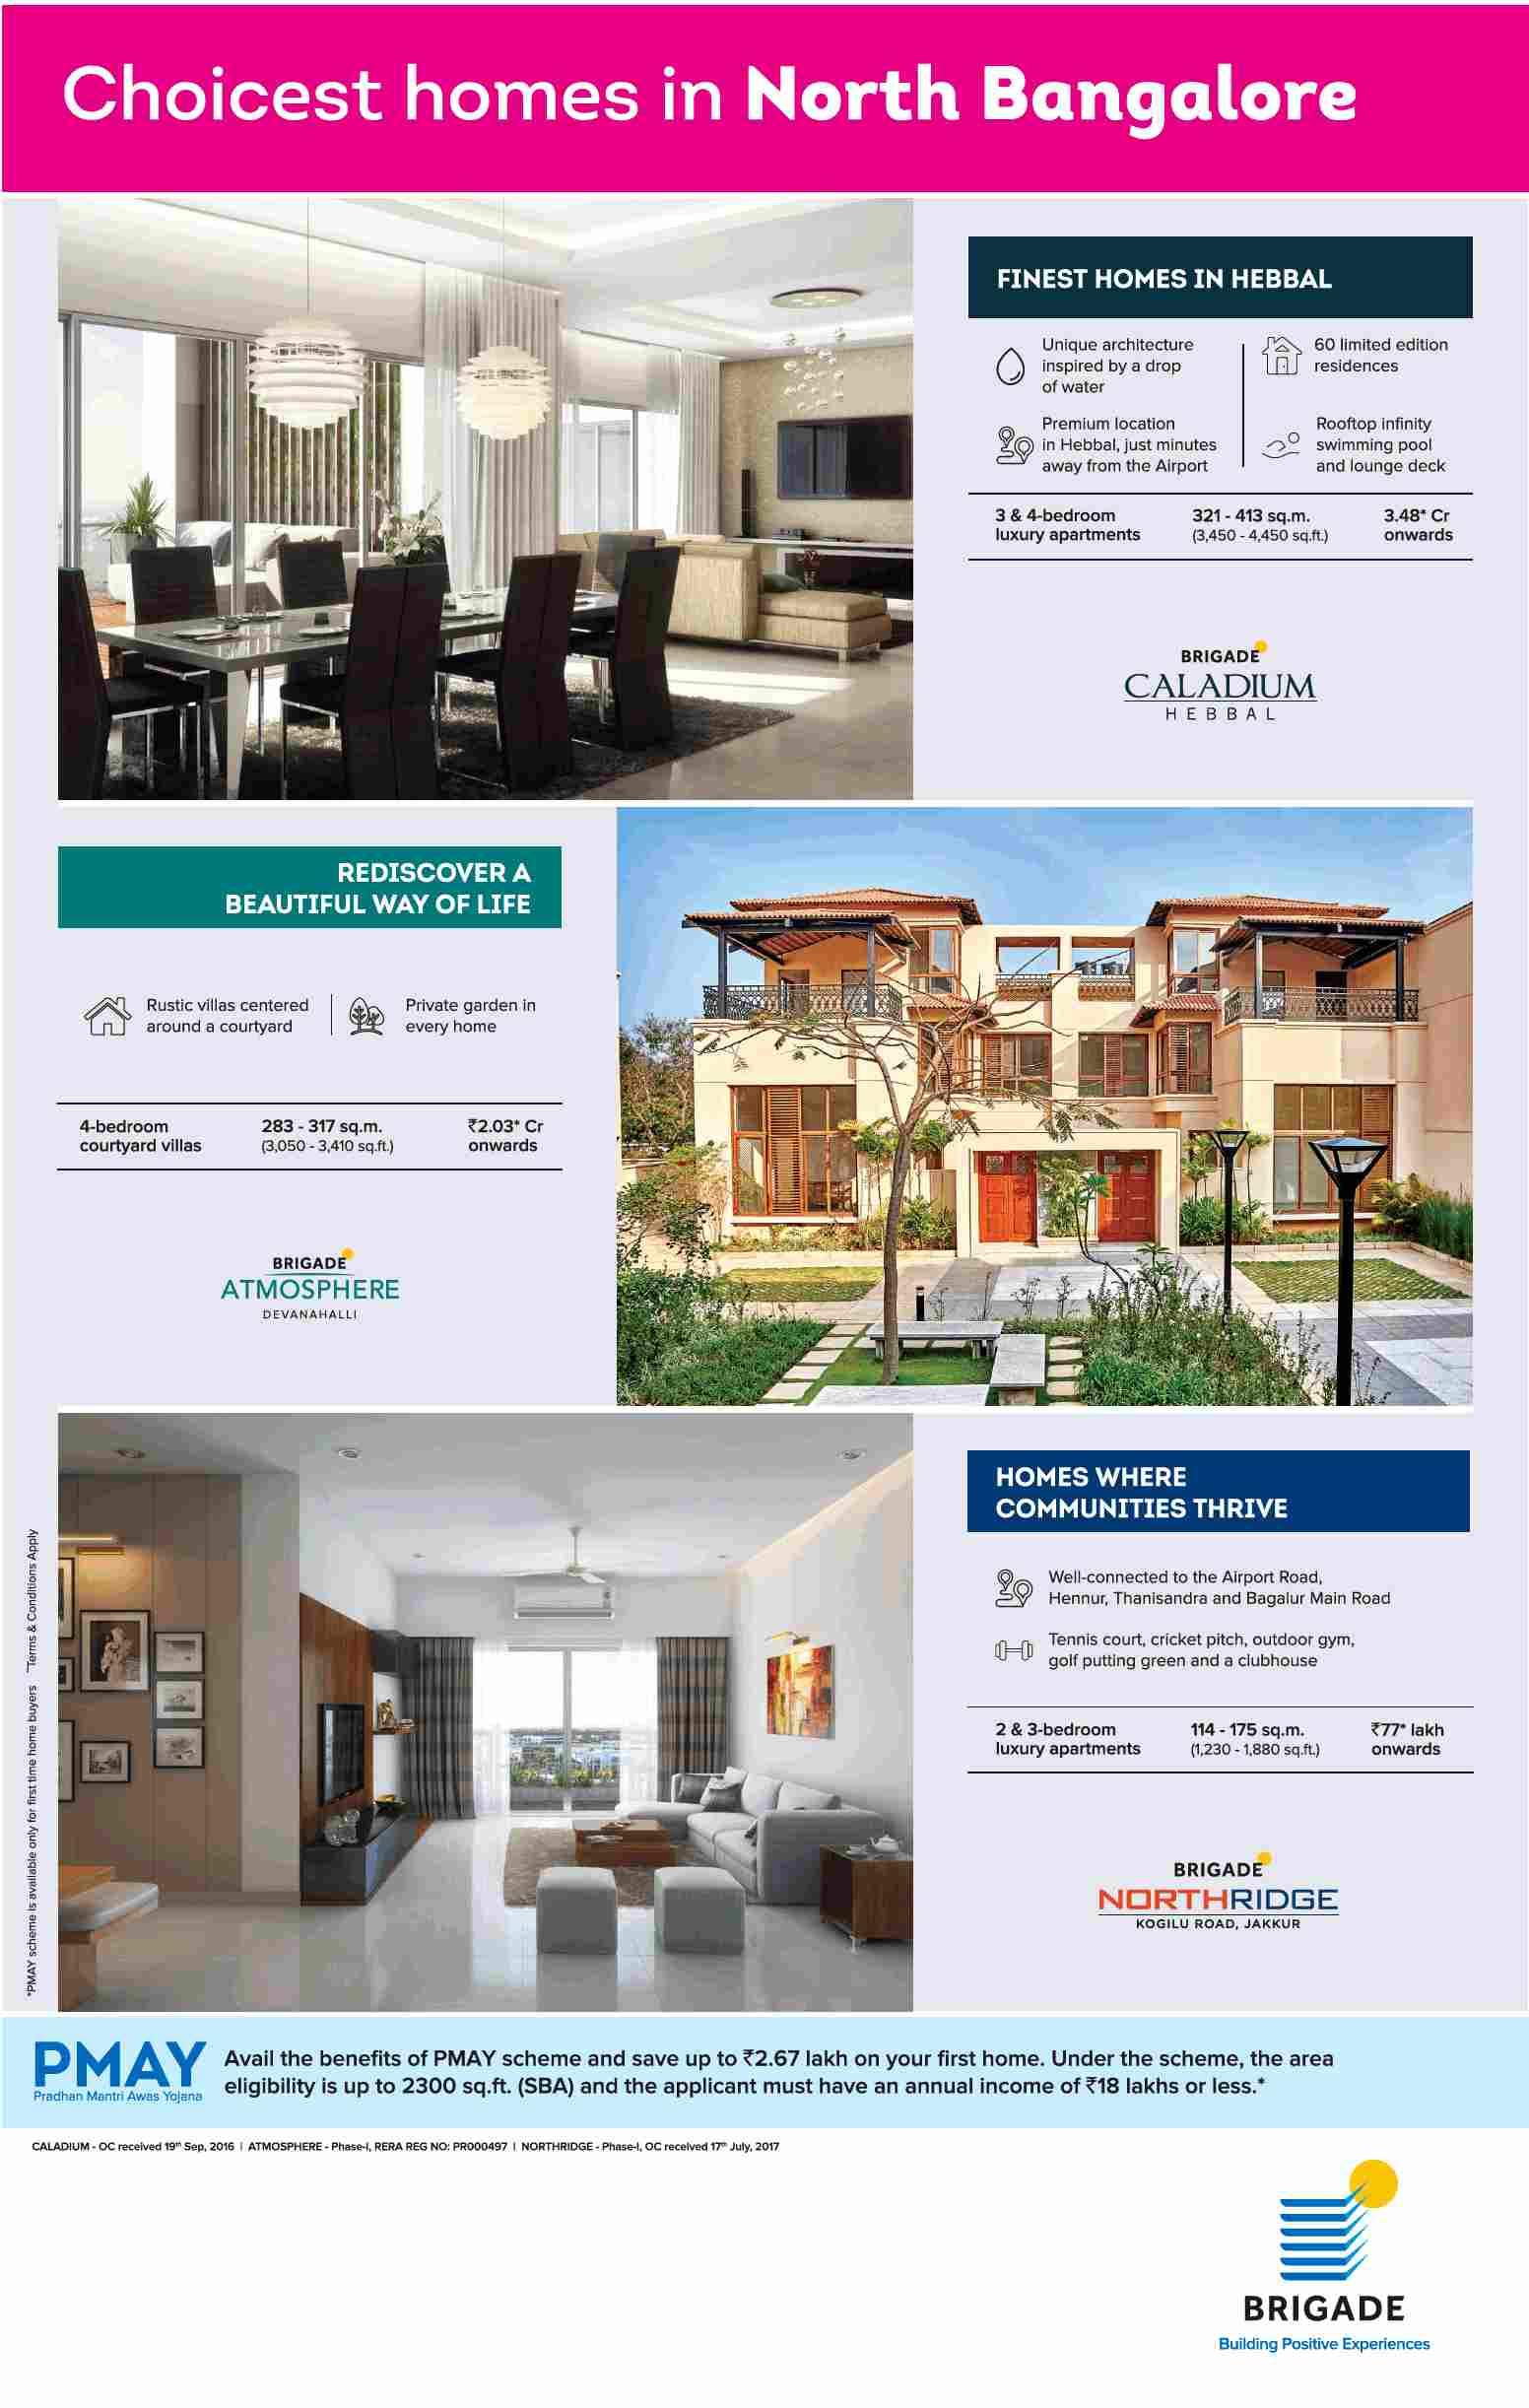 Choicest homes from Brigade Group in North Bangalore